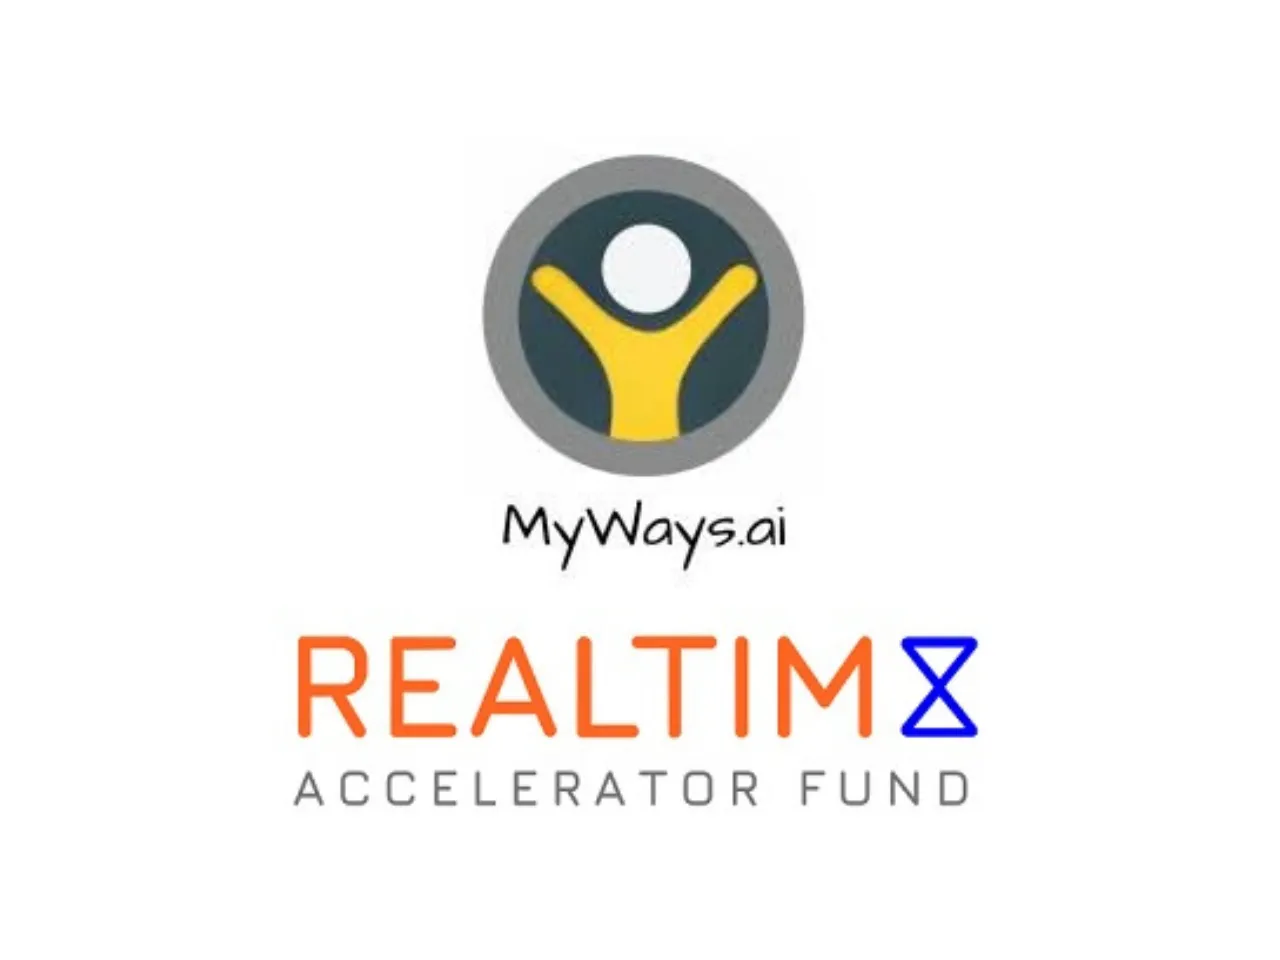 MyWays.ai raises funding from Real Time Angel Fund